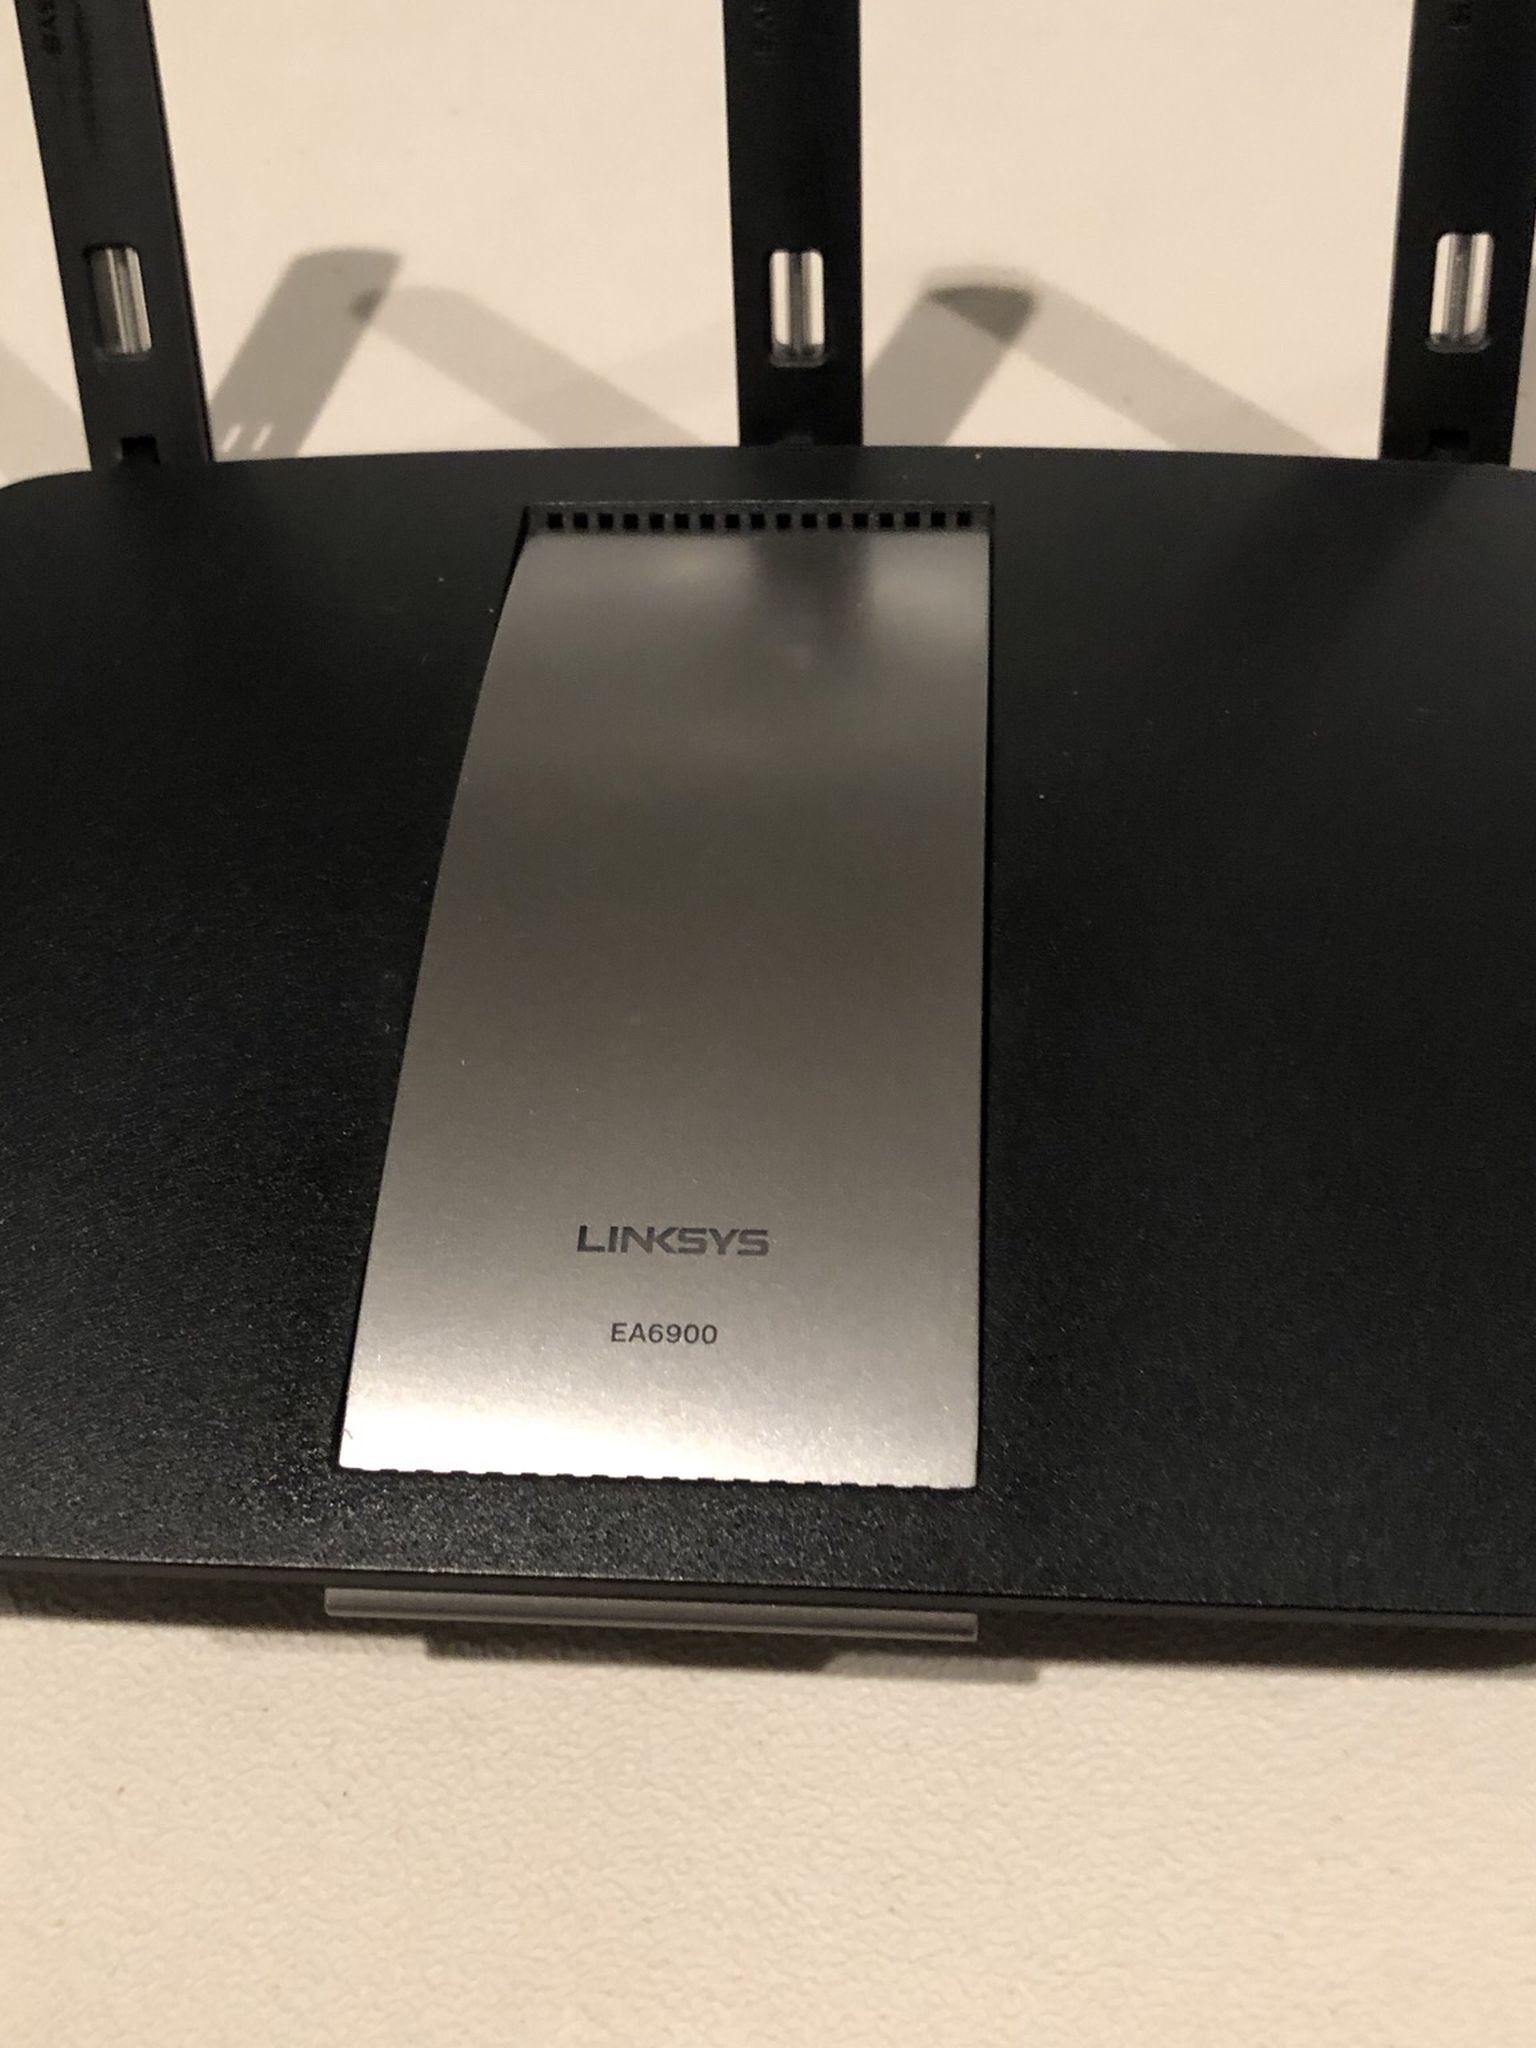 Linksys EA6900 AC1900 1900 Mbps 5 Port Wireless Router